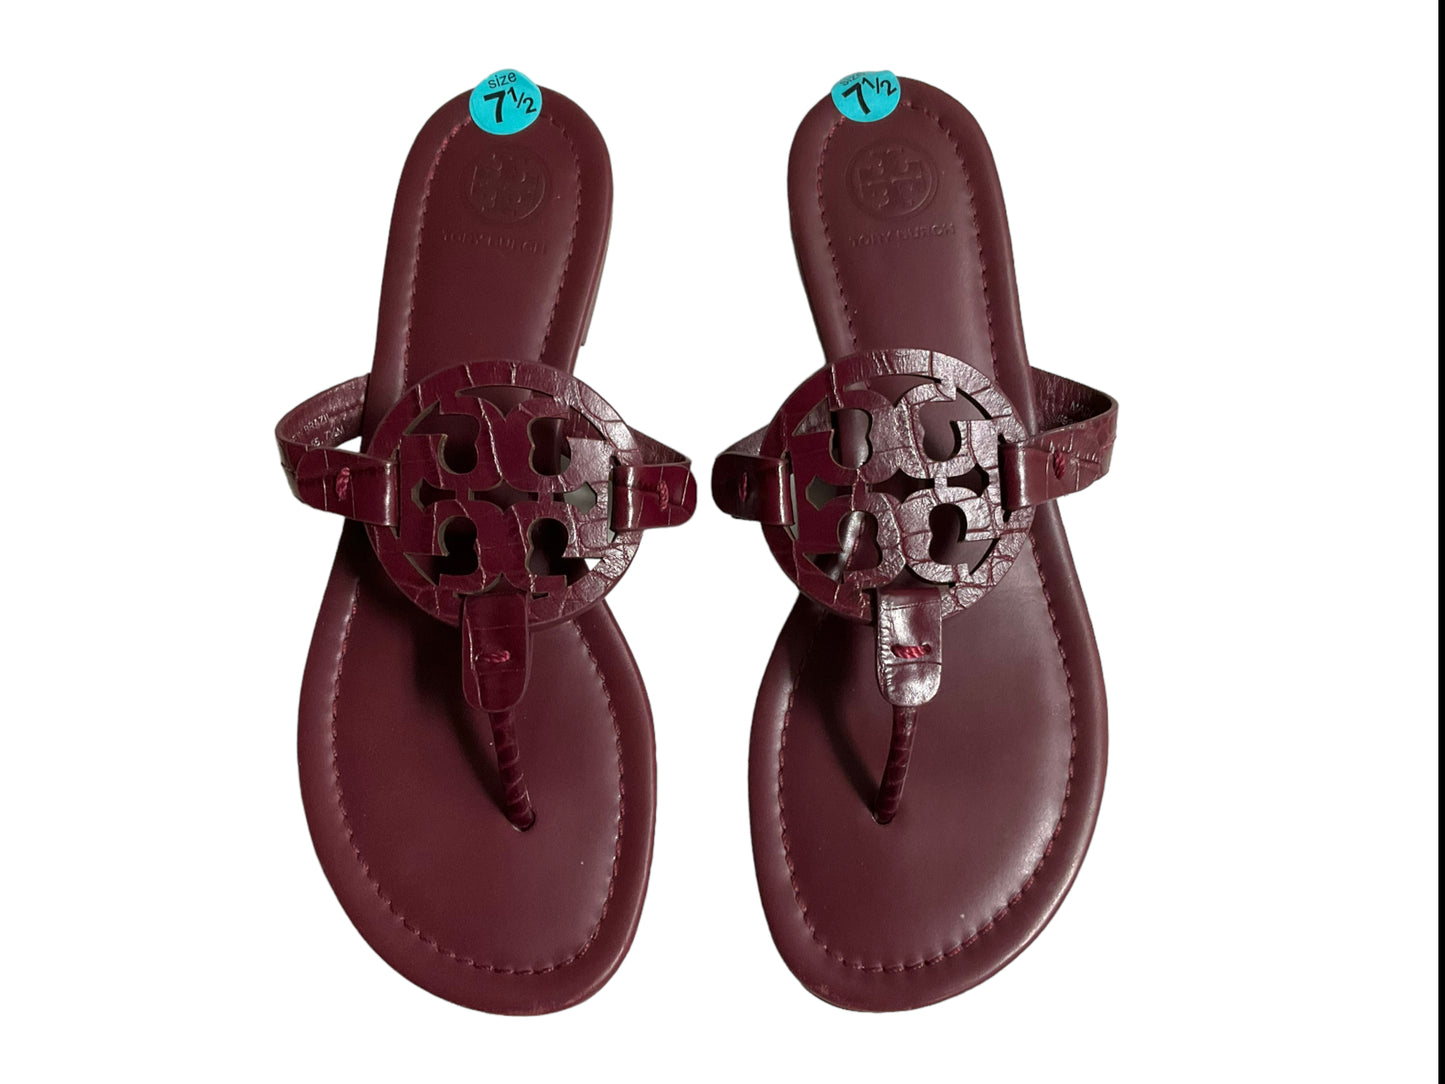 Sandals Designer By Tory Burch  Size: 7.5